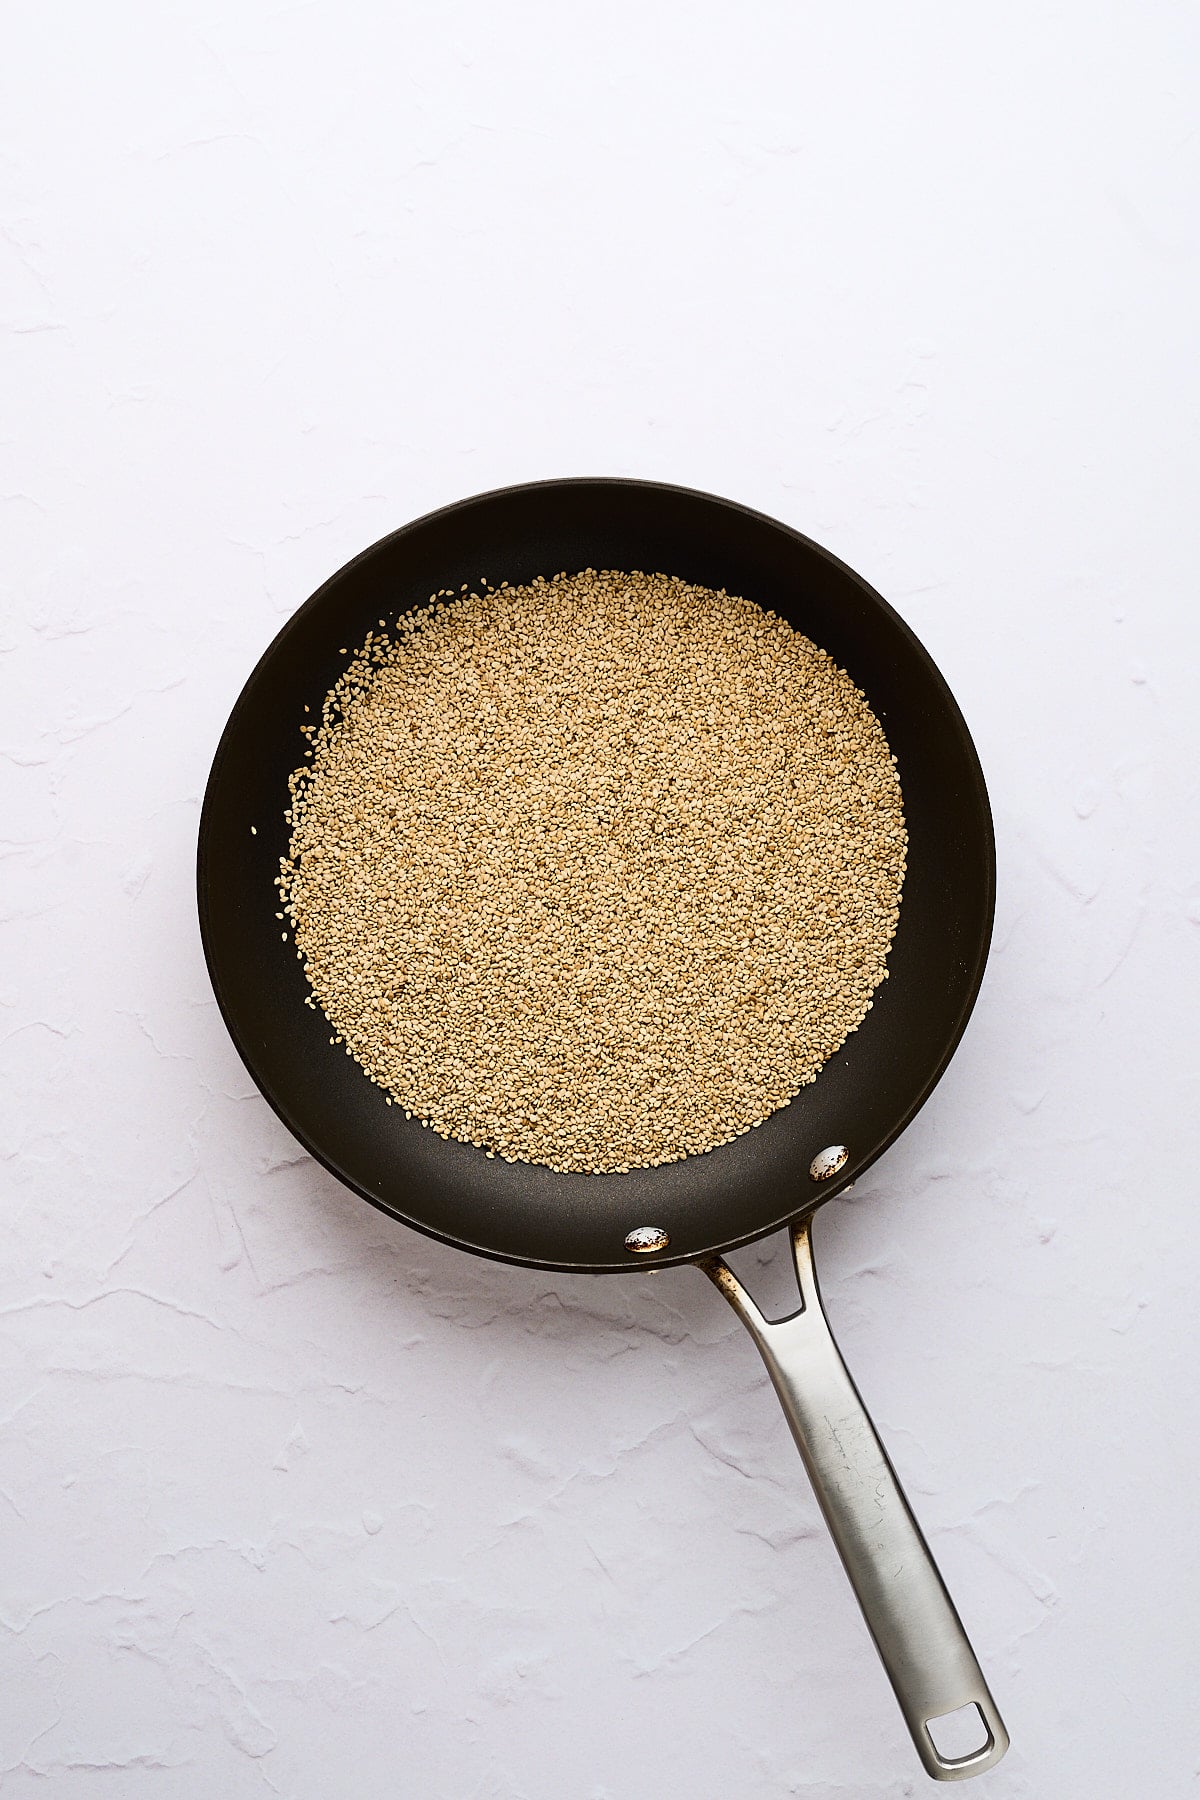 Toasted sesame seeds in a pan.